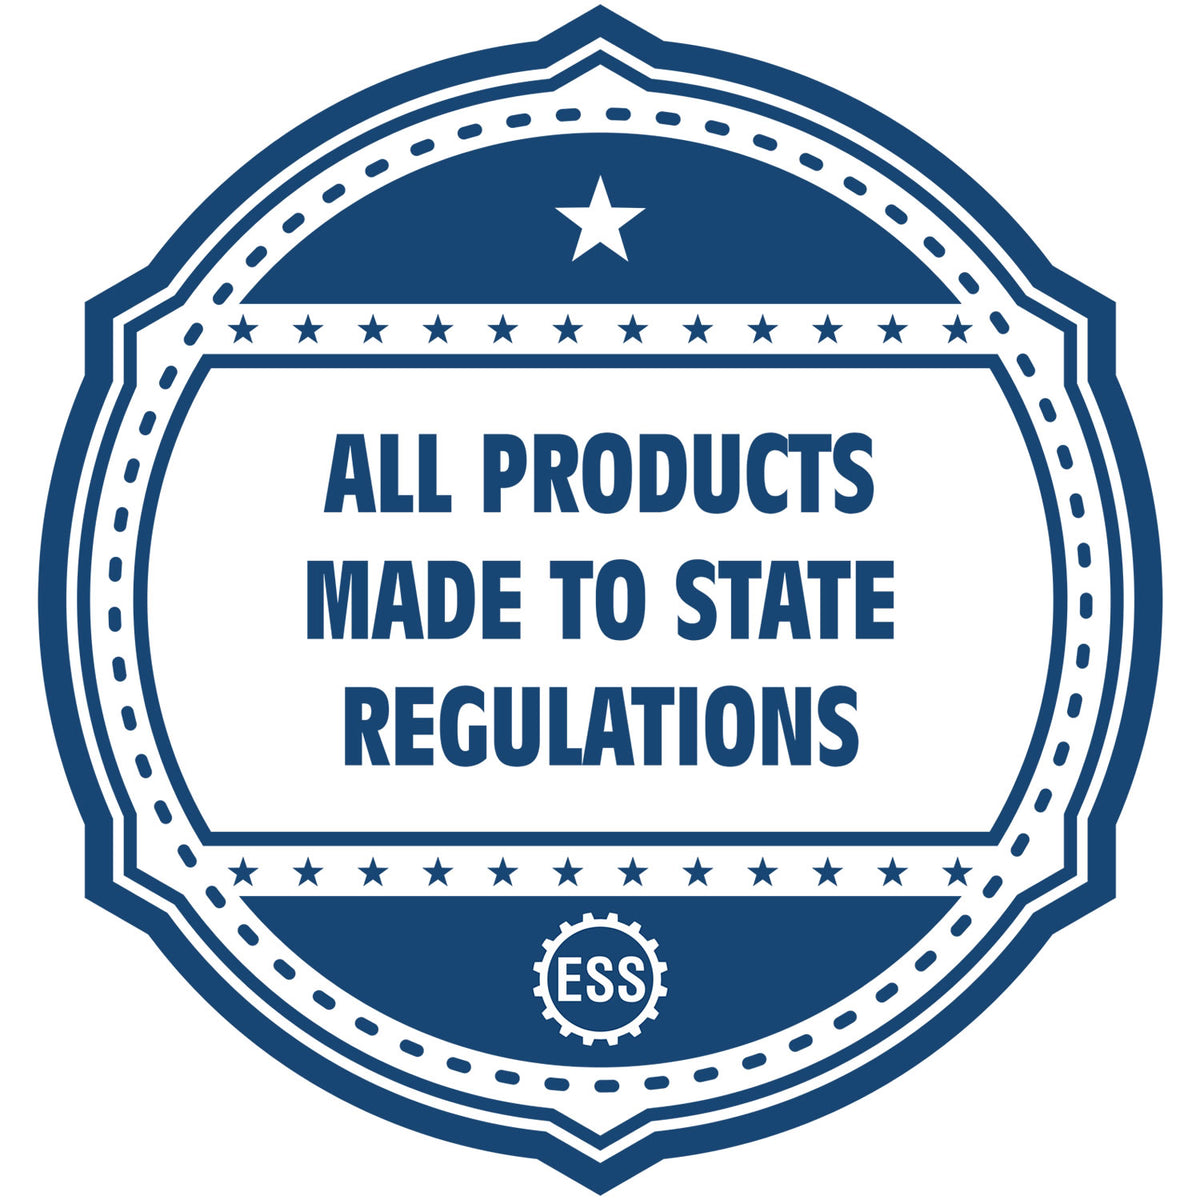 A blue icon or badge for the Gift Georgia Landscape Architect Seal showing that this product is made in compliance with state regulations.